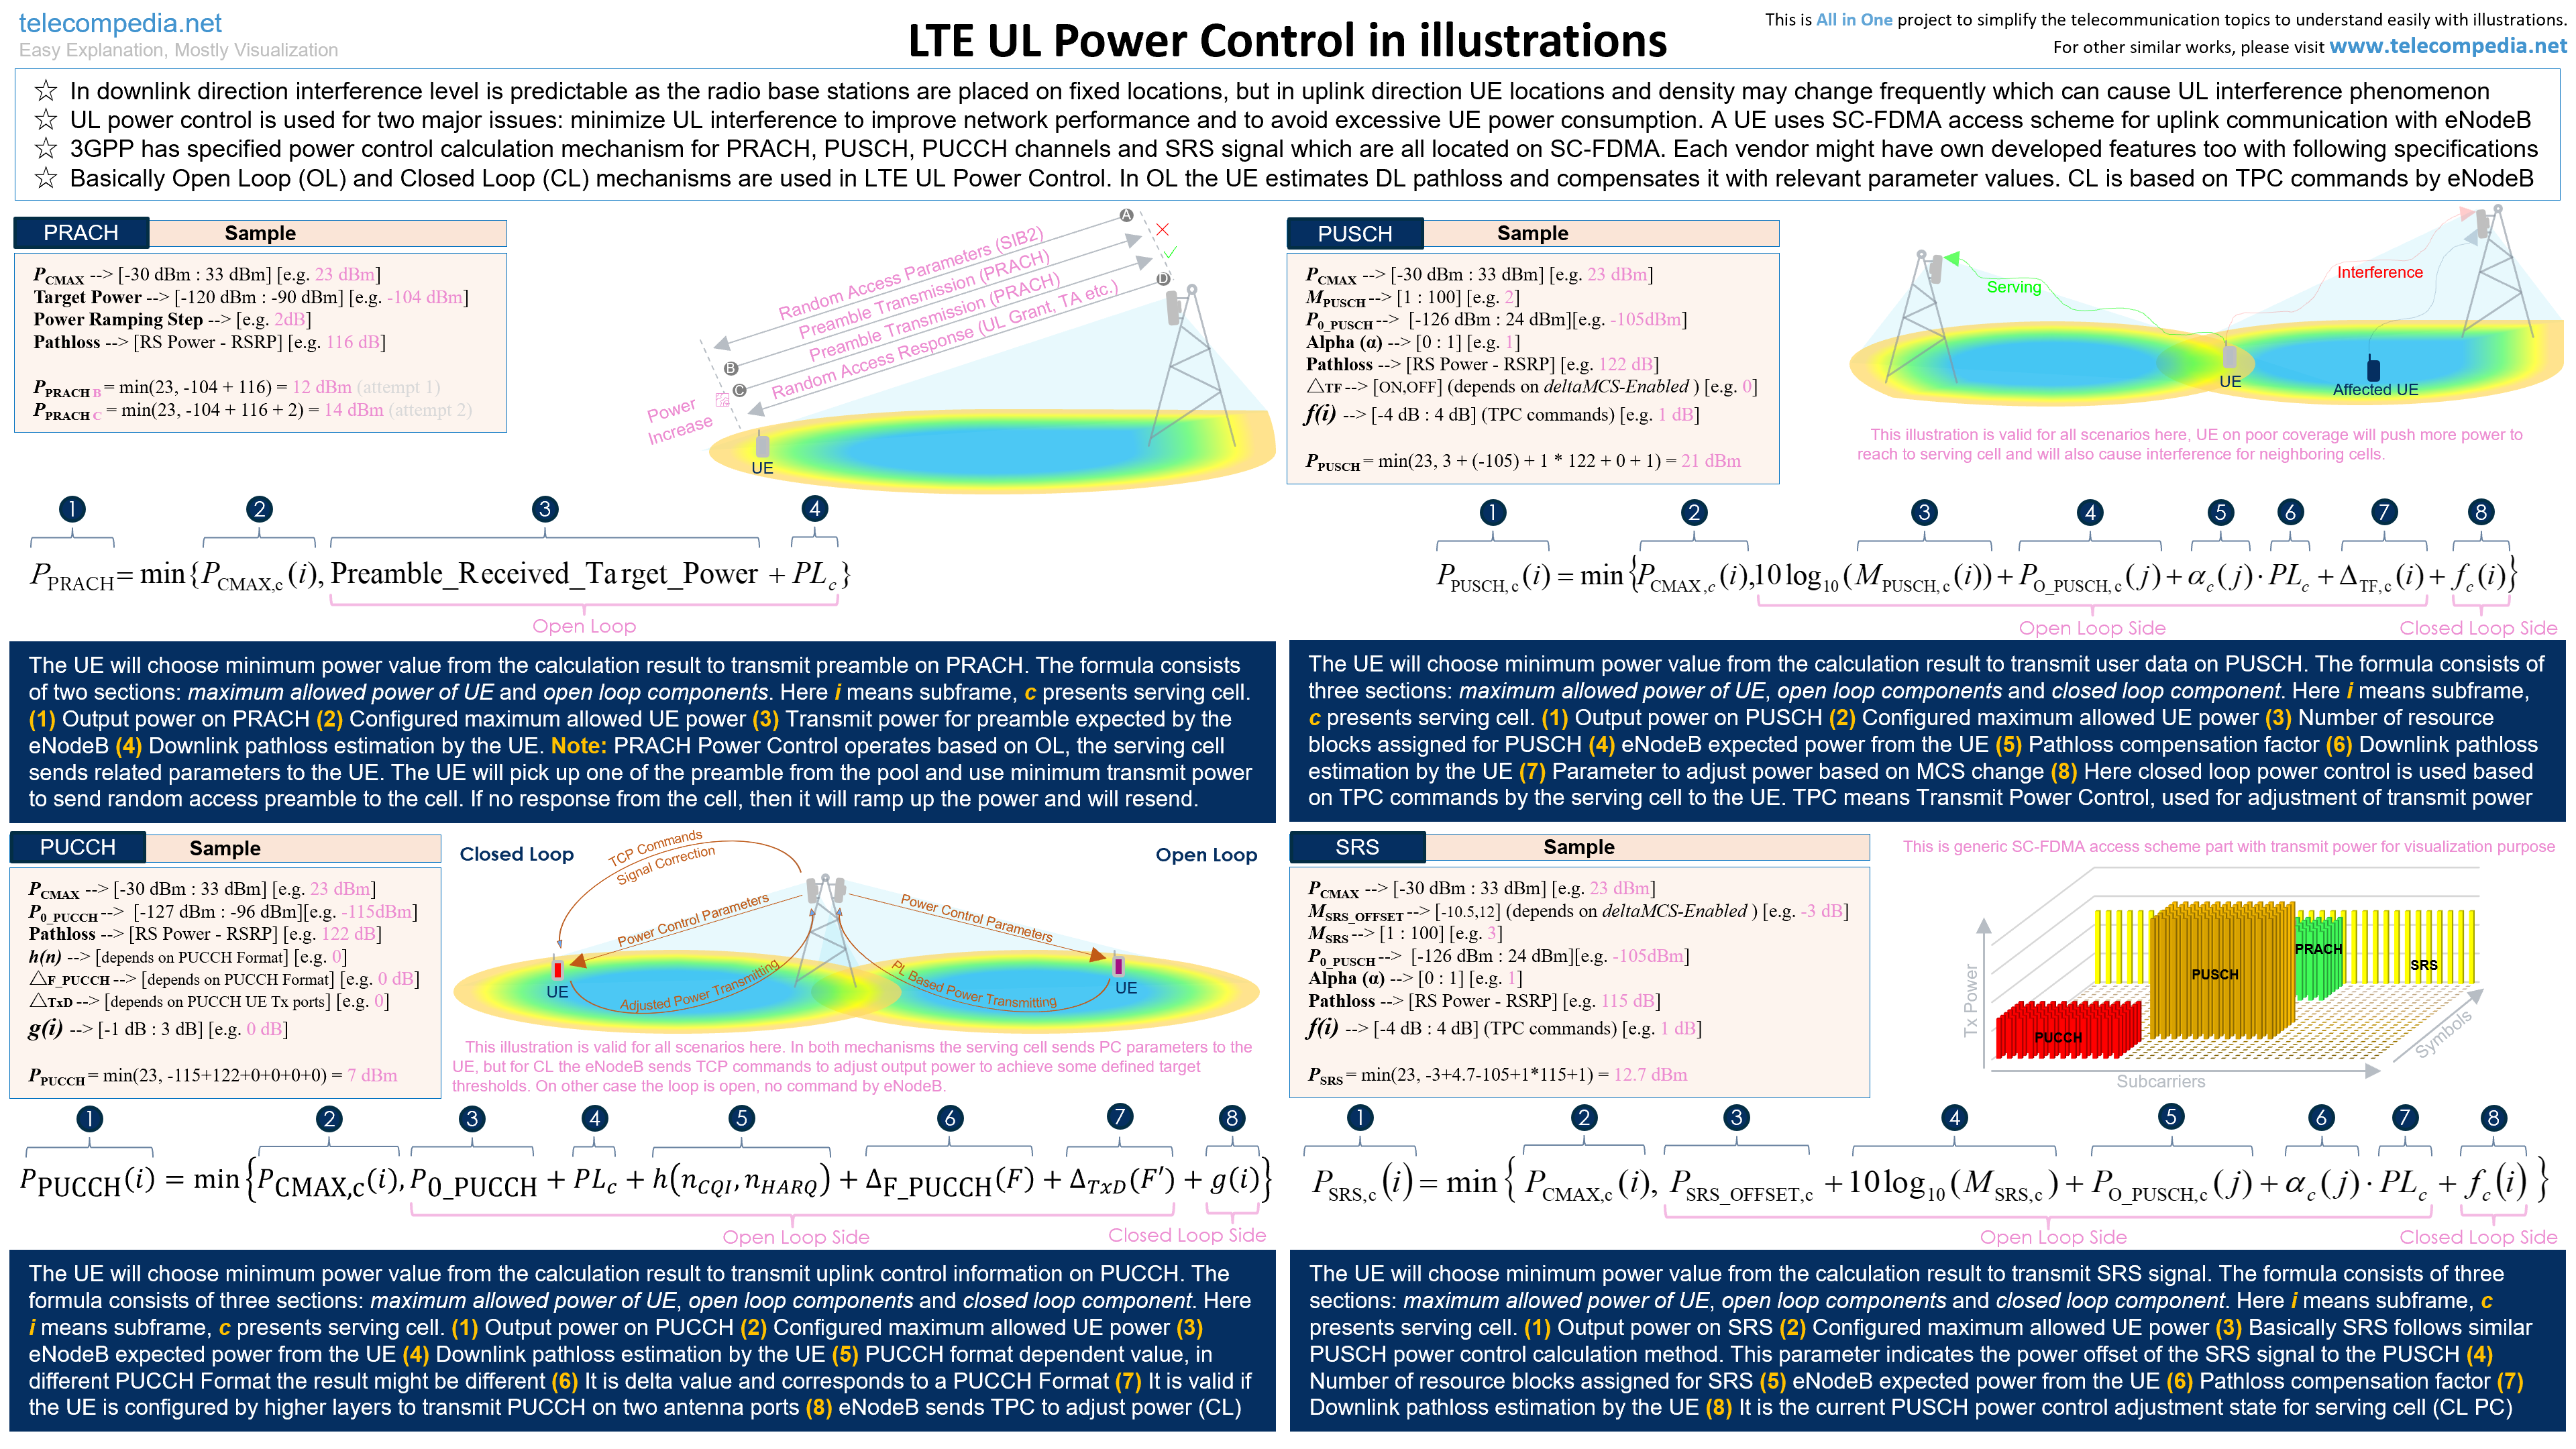 LTE UL Power Control in illustrations